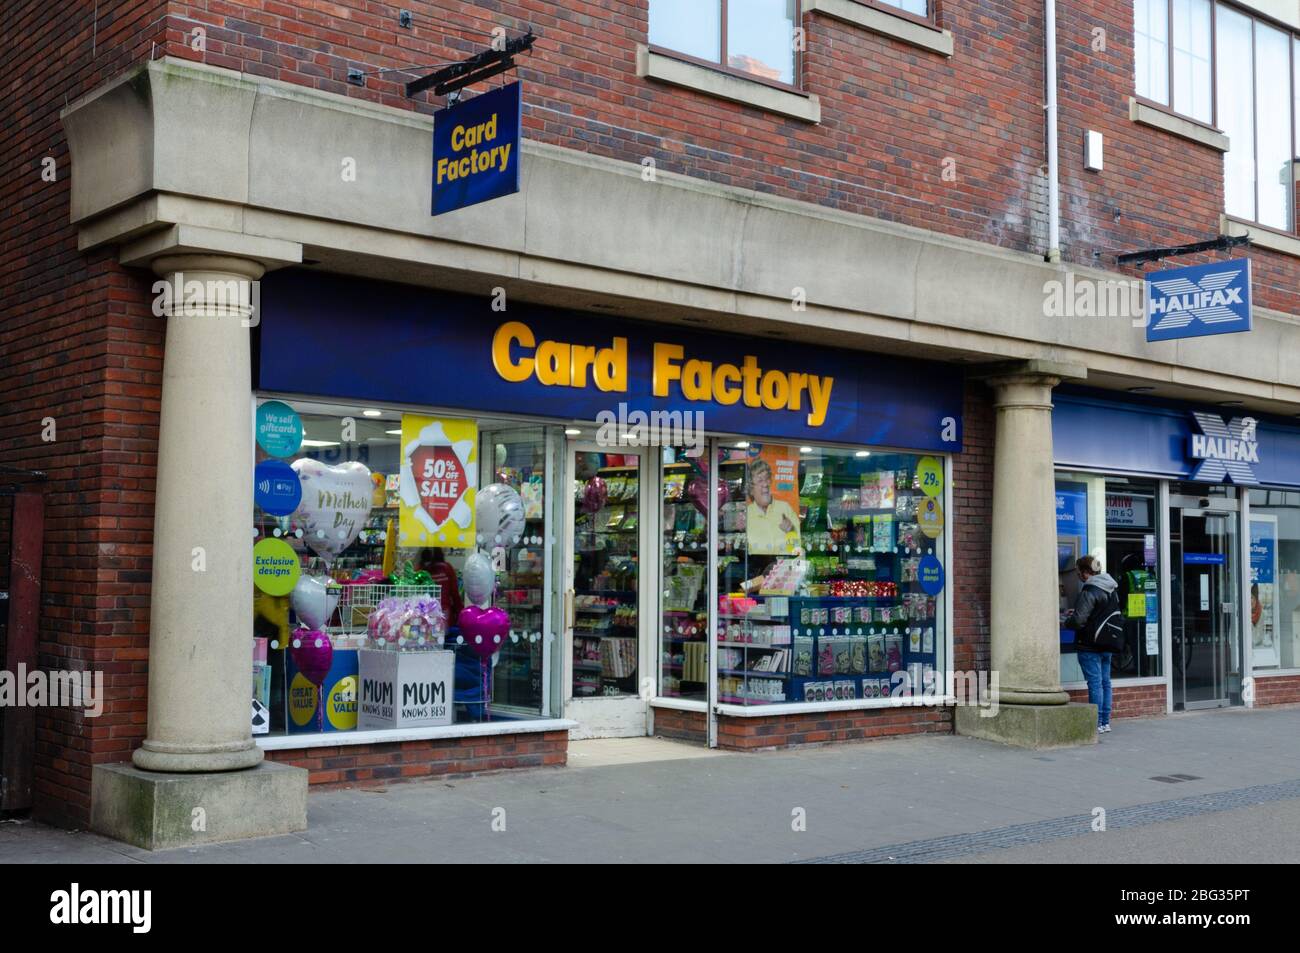 Chester, UK: Mar 1, 2020: A 50% sale is promoted at the Card Factory store on Frodsham Street. Stock Photo